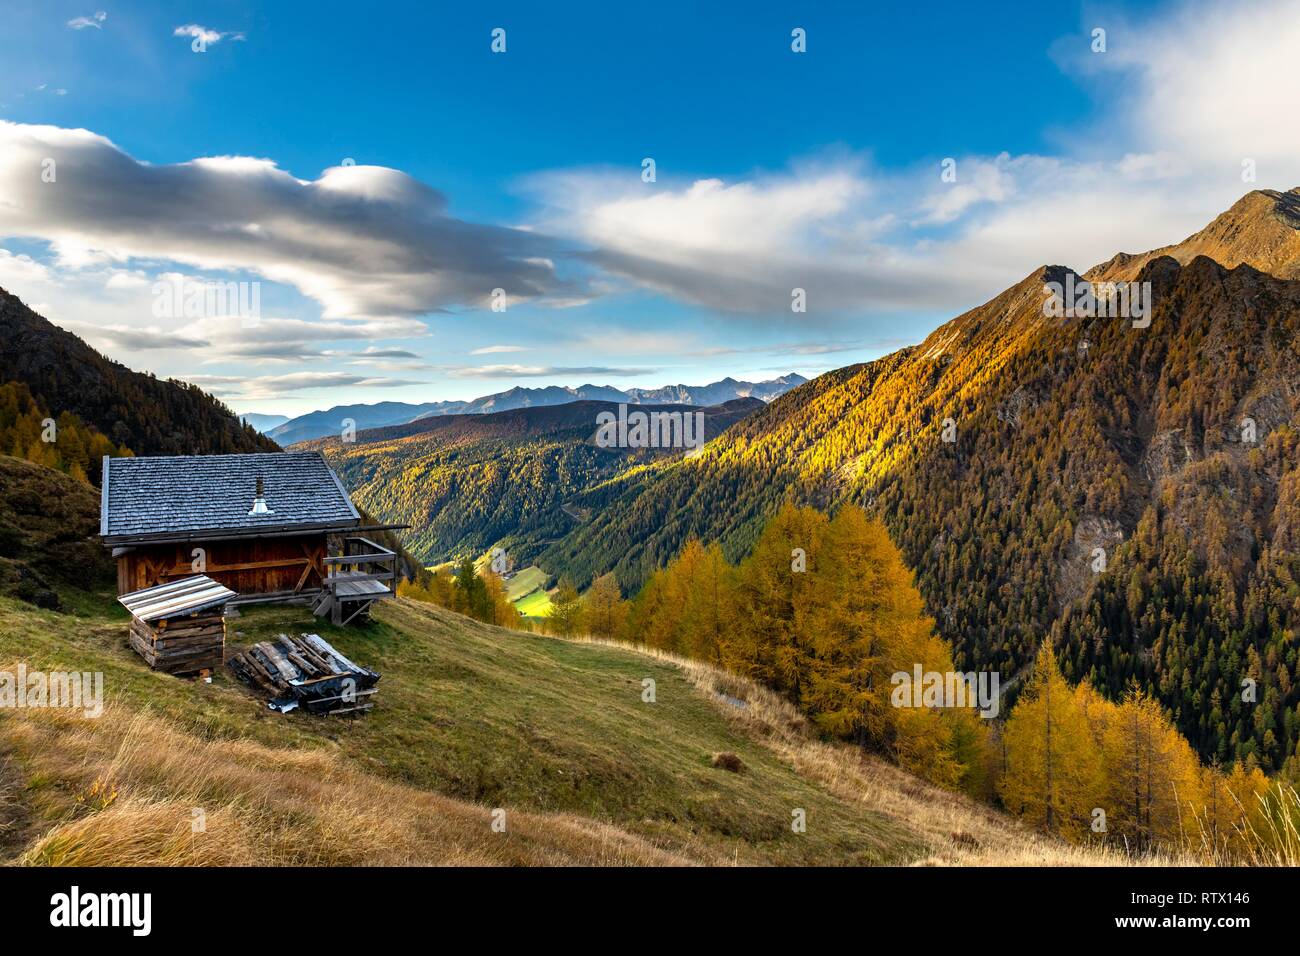 Mountain hut over valley with autumnal mountain larch forest (Larix decidua), Vals, Valstal, South Tyrol, Italy Stock Photo